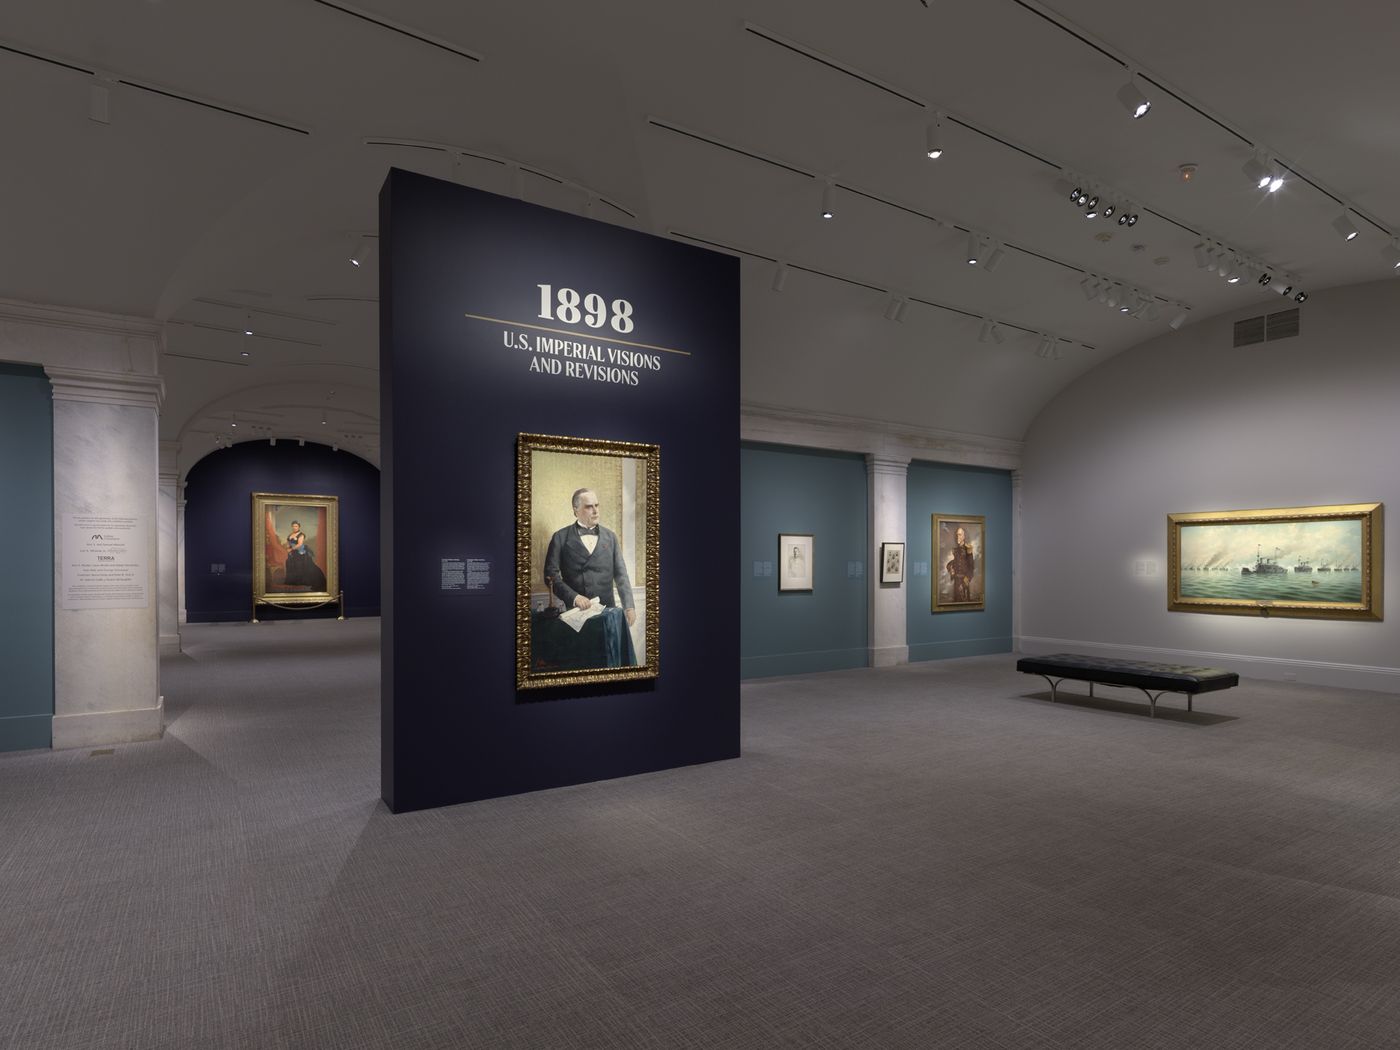 1898: U.S. Imperial Visions and Revisions exhibition at National Portrait Gallery